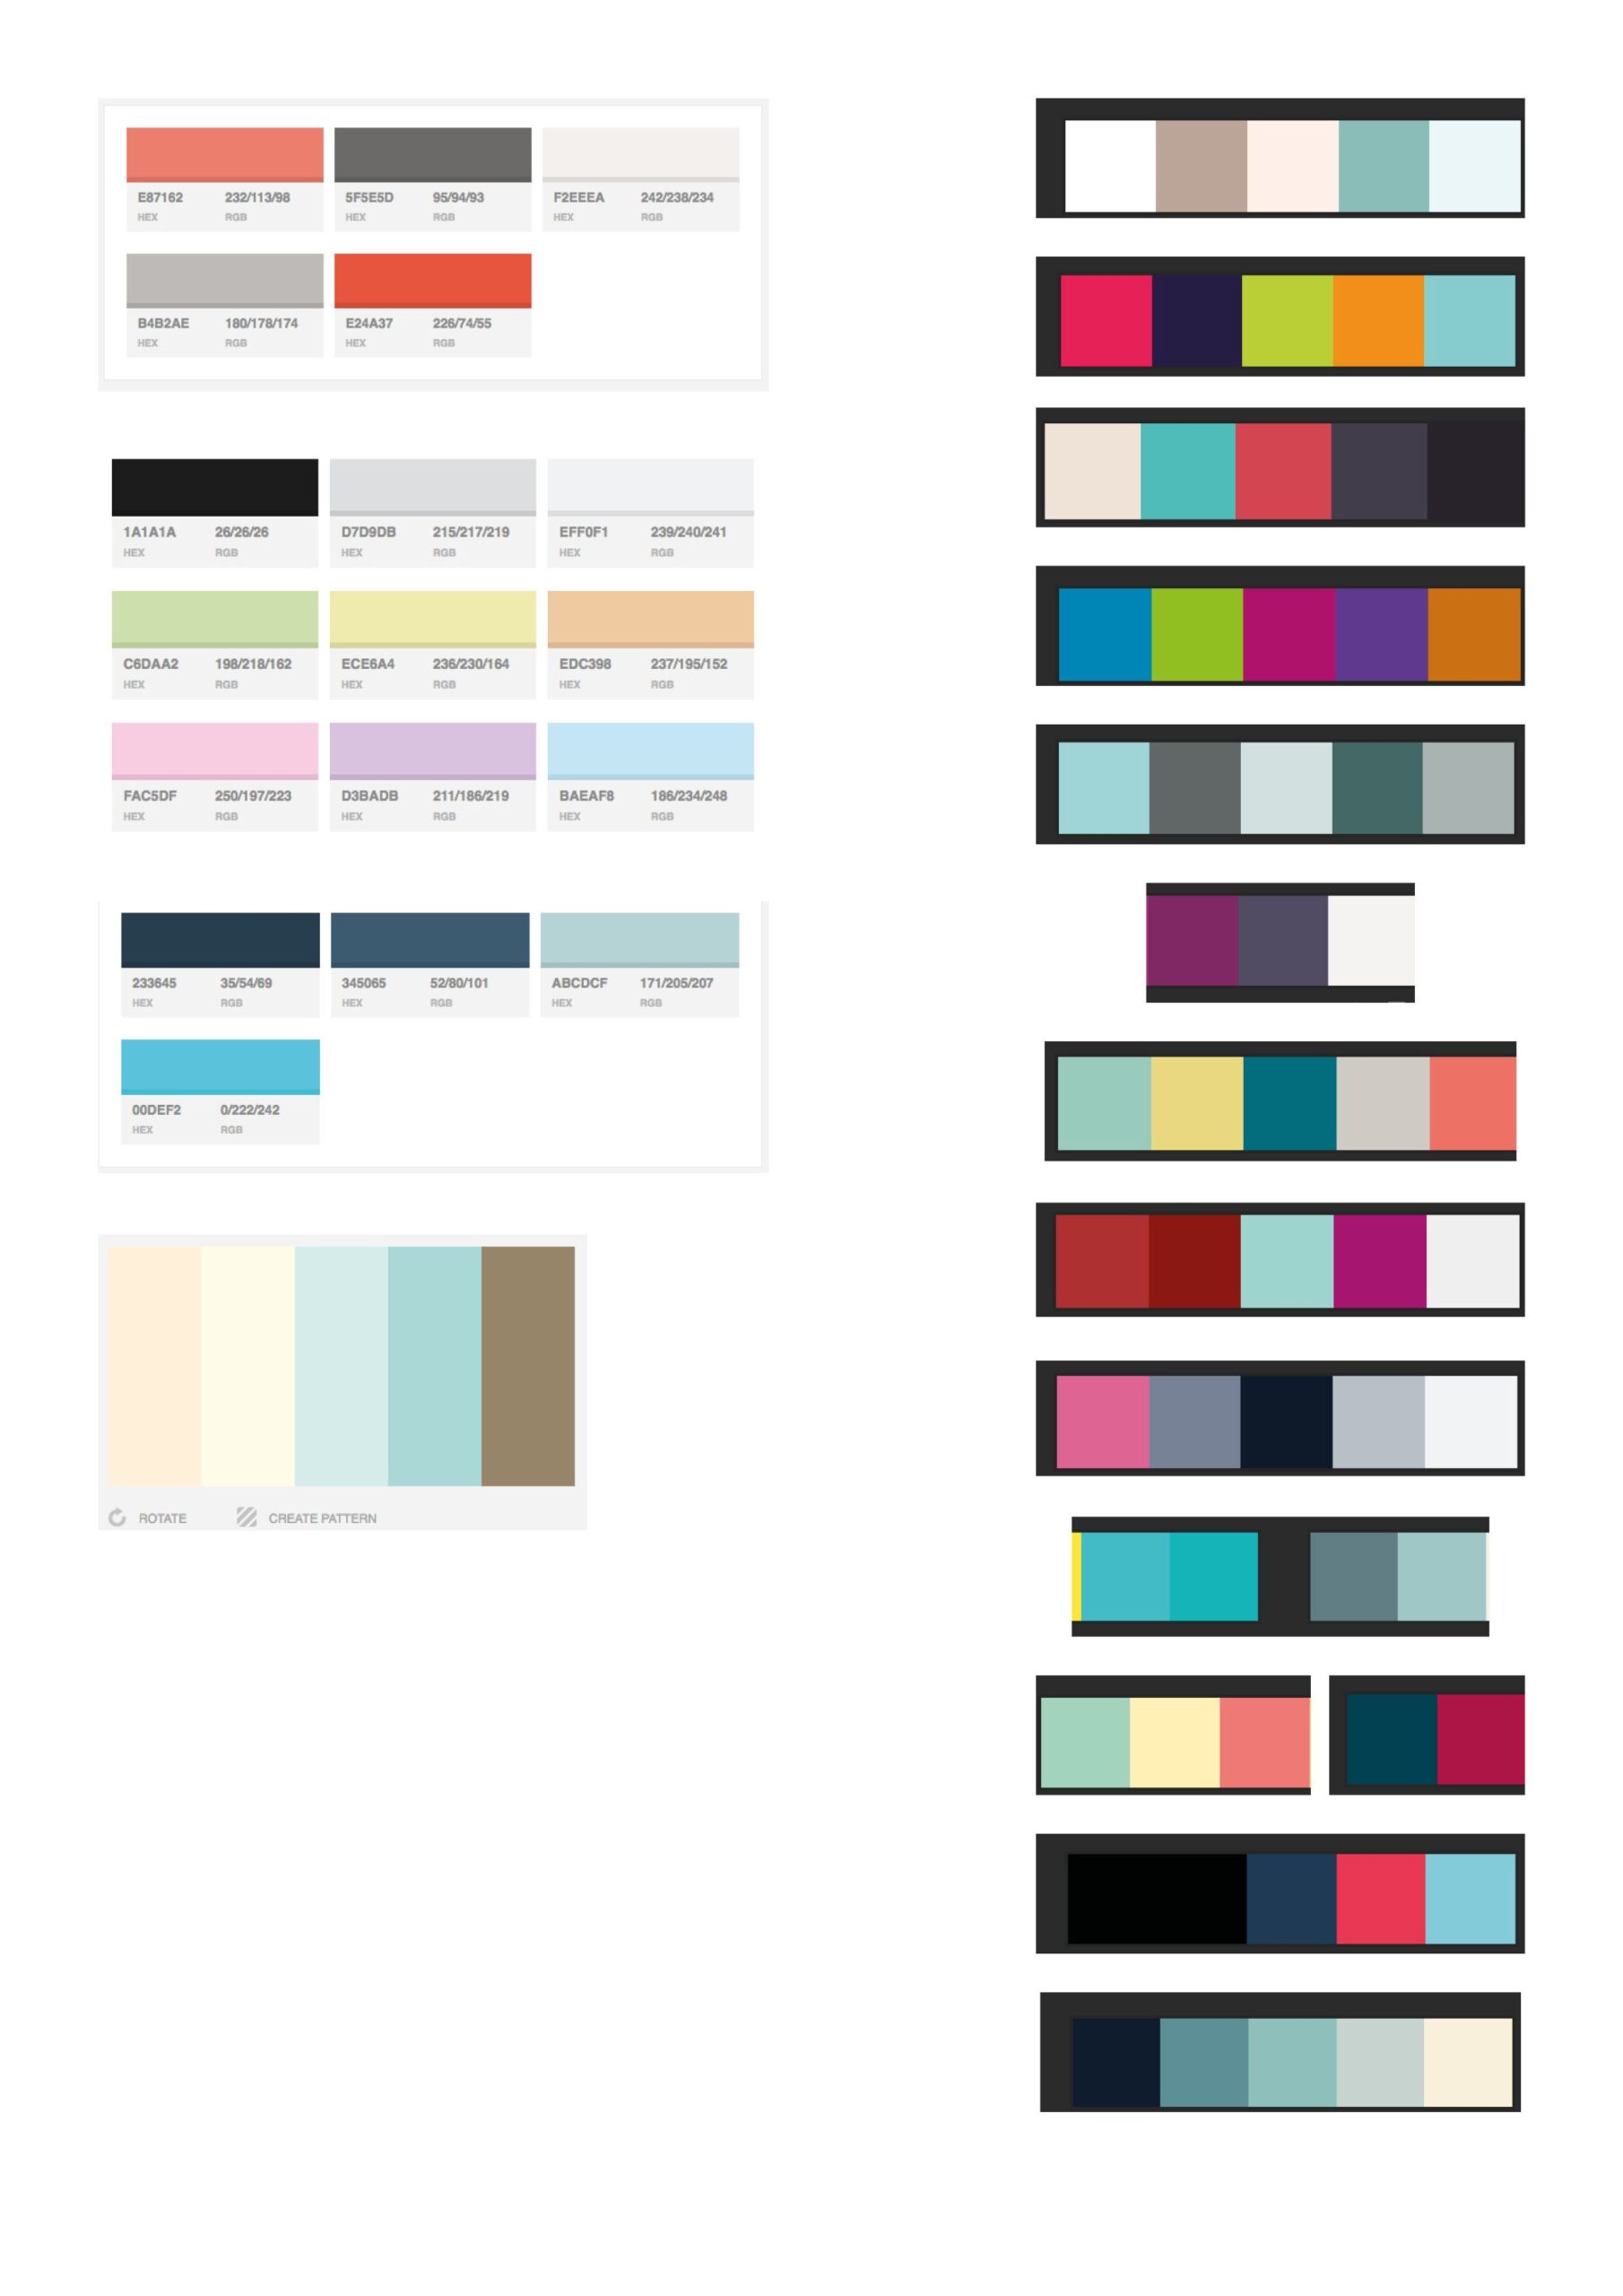 25 Color Palettes Inspired by Beautiful Landscapes | Inspiring color schemes by Sarah Renae Clark